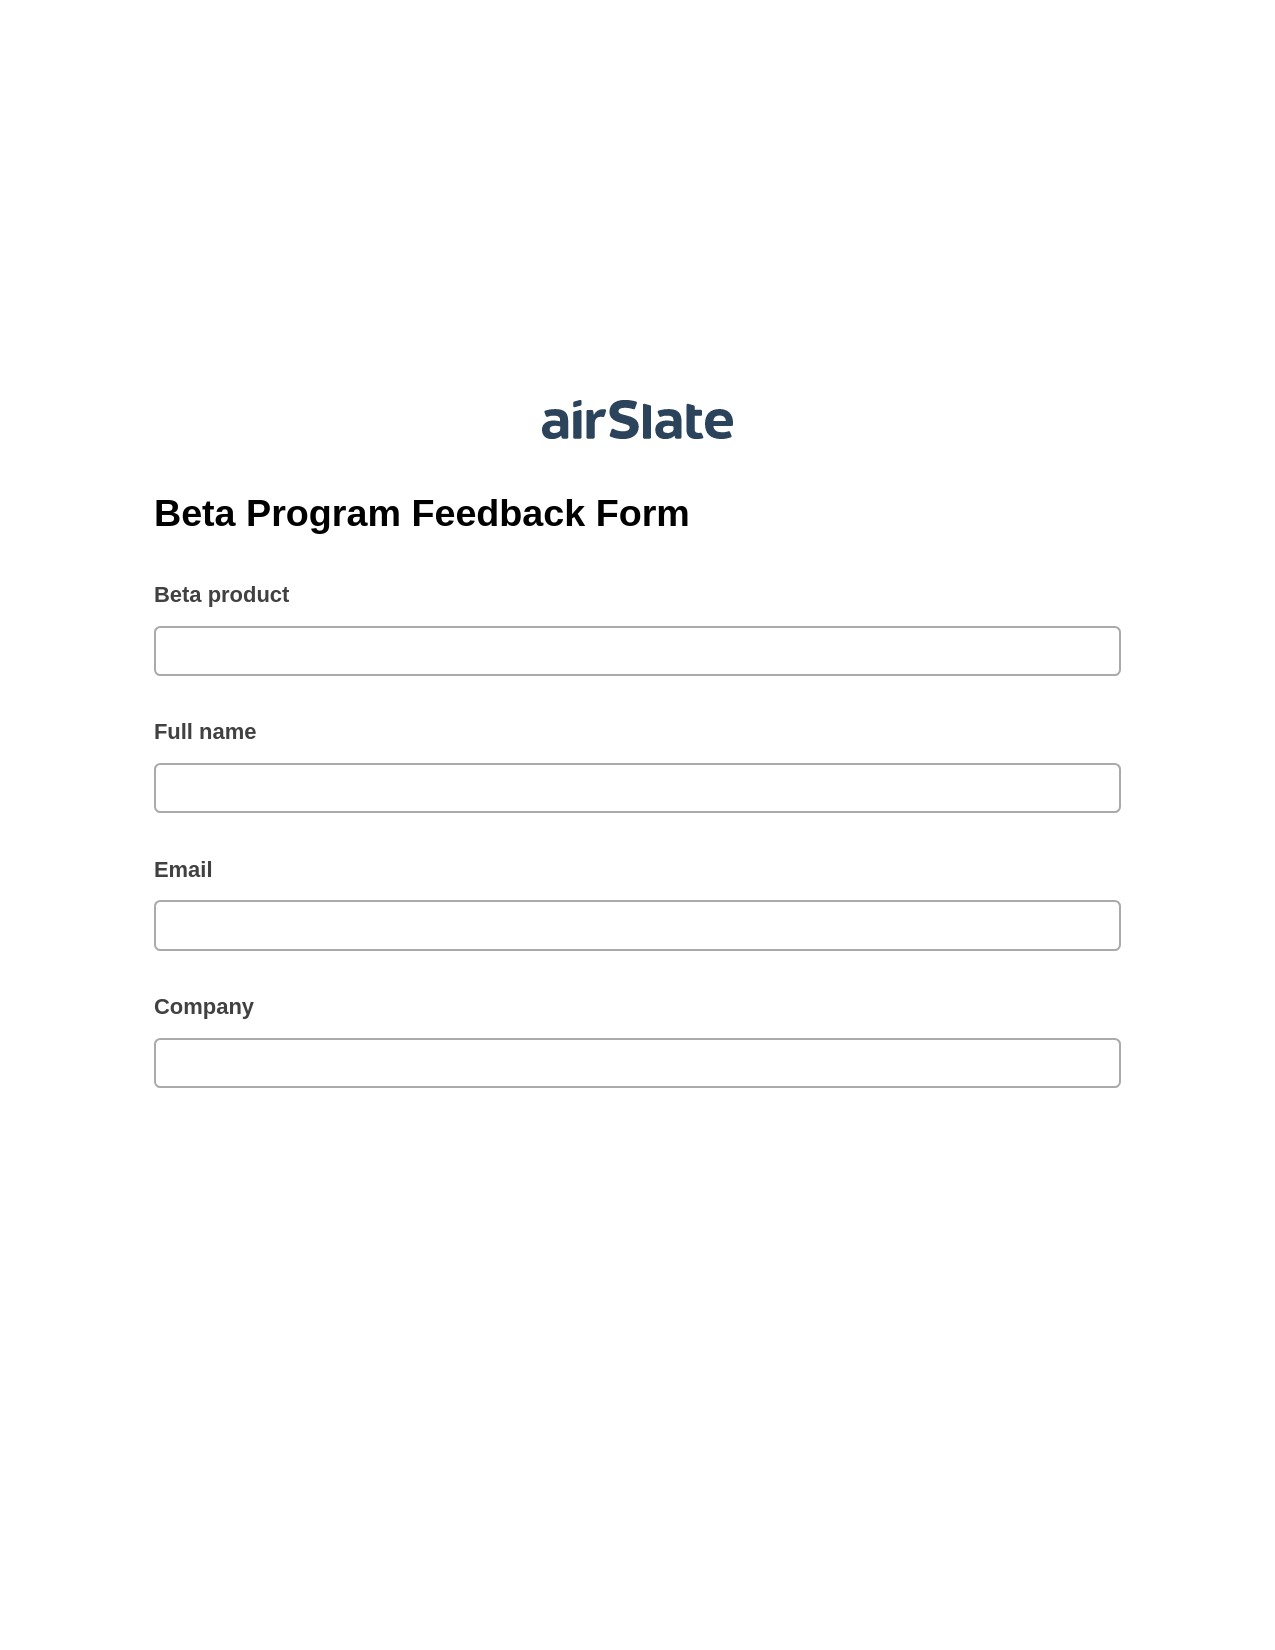 Multirole Beta Program Feedback Form Pre-fill from Salesforce Records with SOQL Bot, Add Tags to Slate Bot, Export to Smartsheet